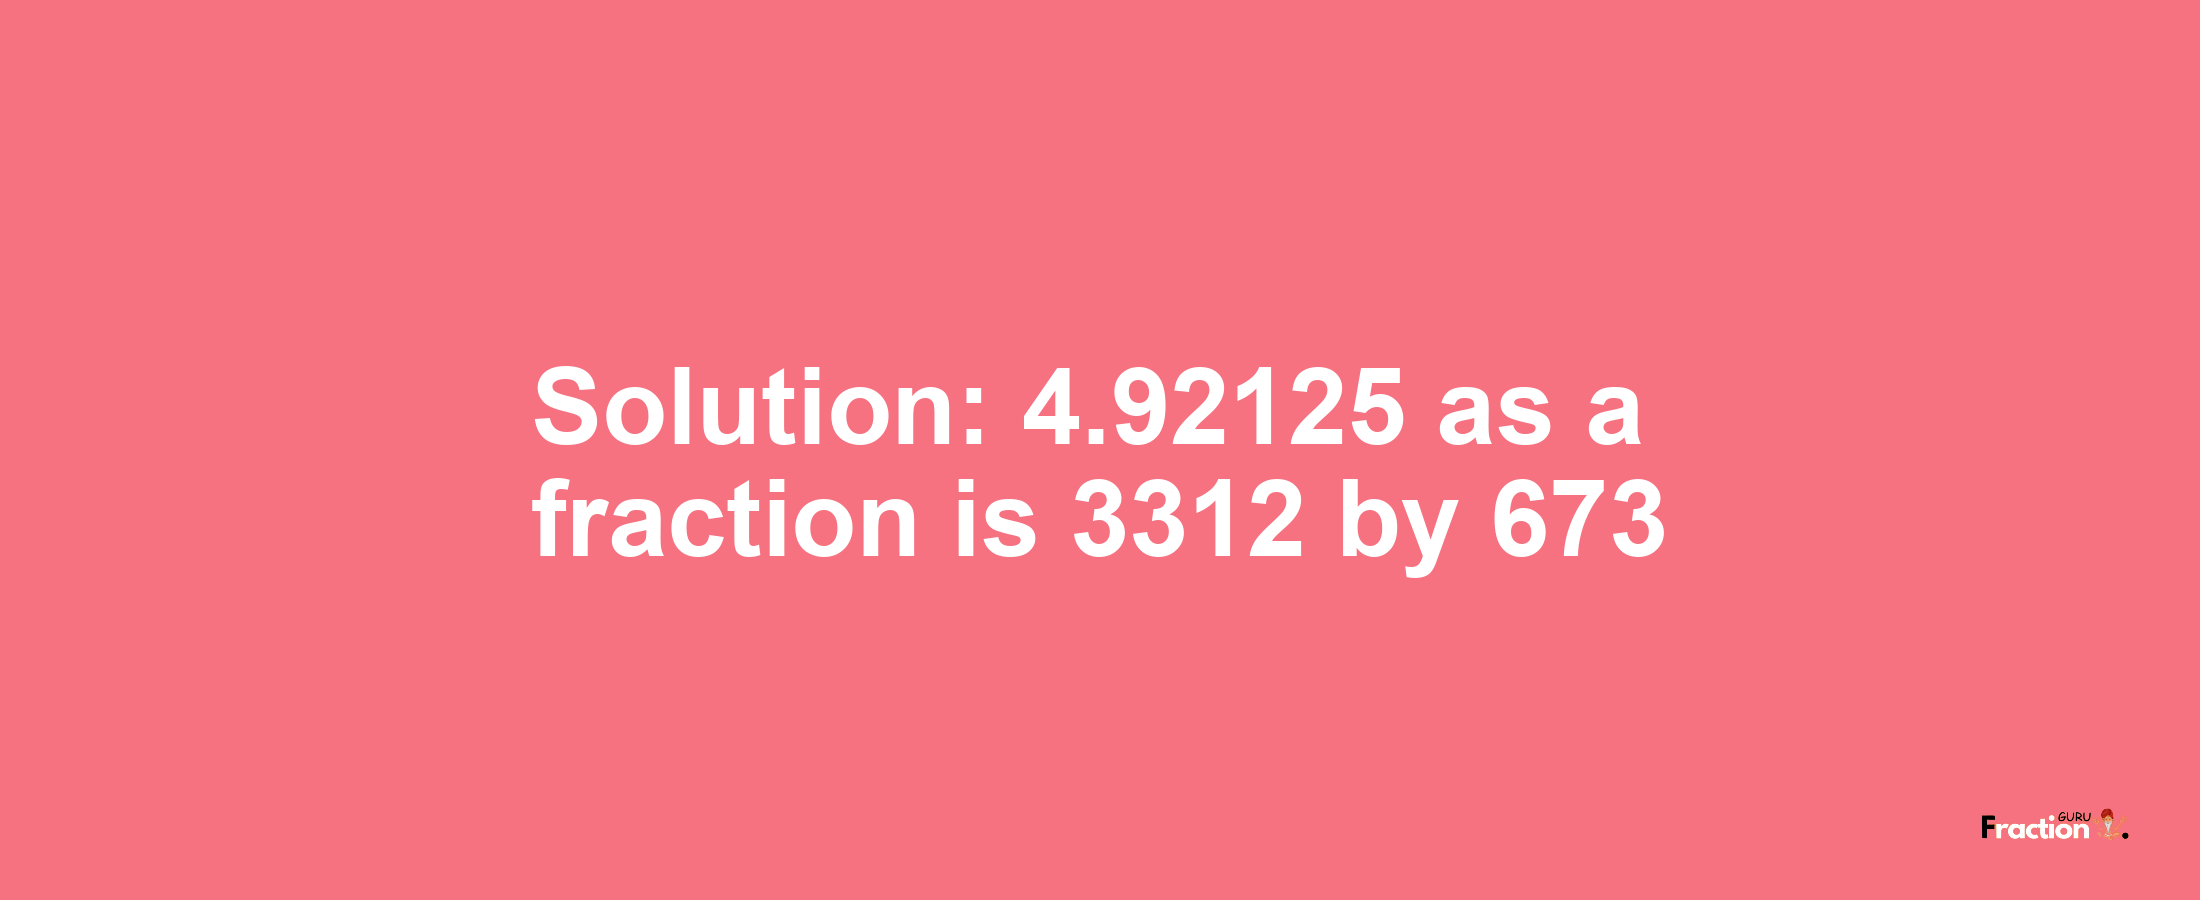 Solution:4.92125 as a fraction is 3312/673